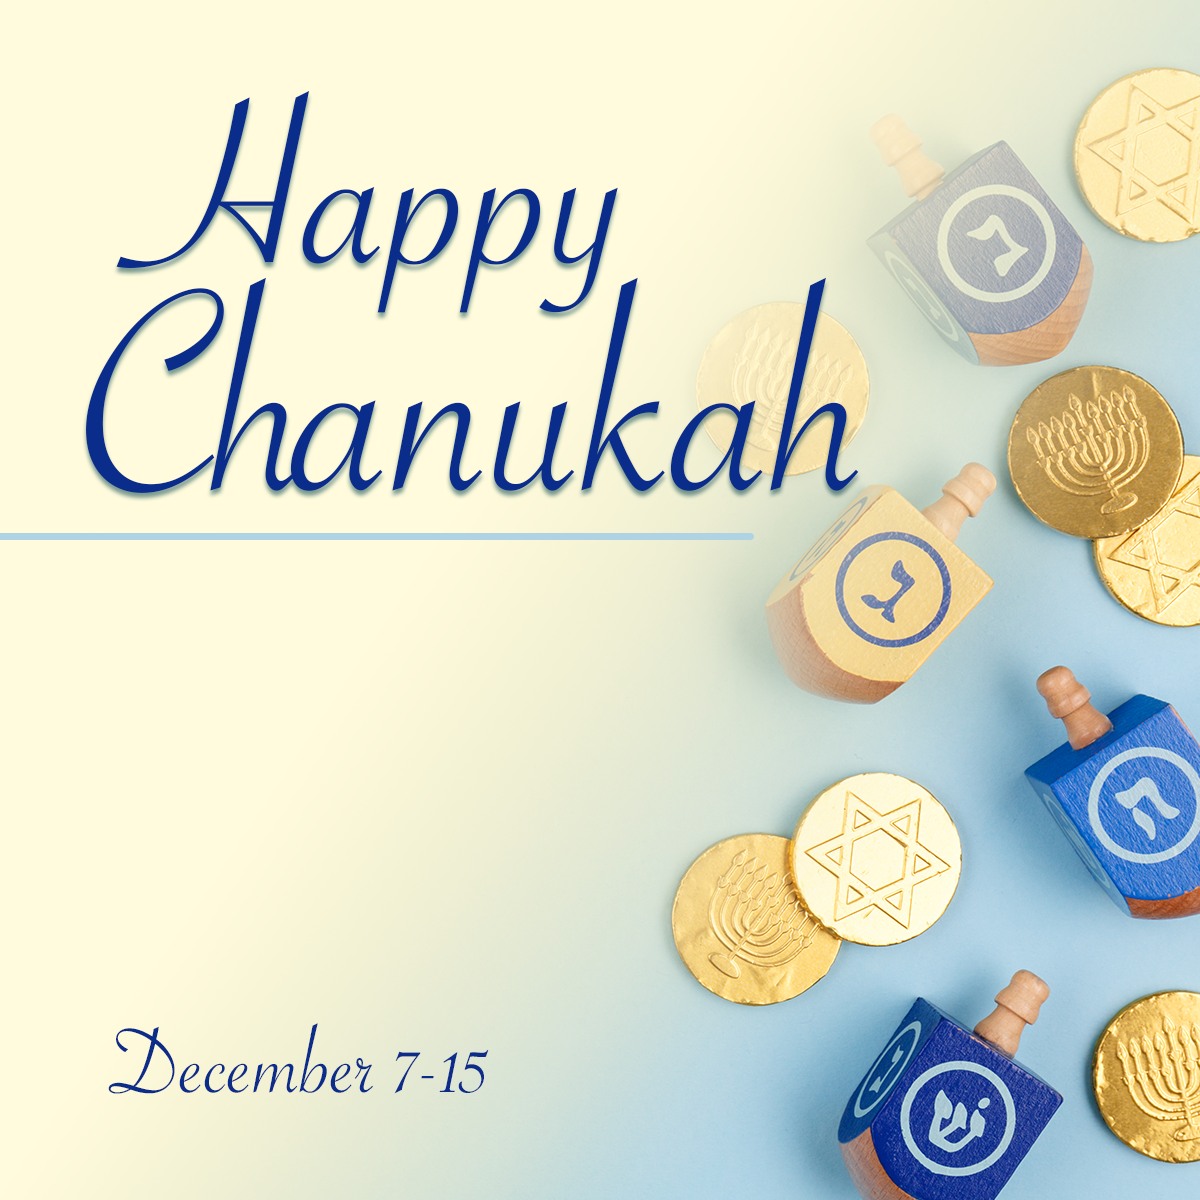 Wishing everyone a very happy Chanukah. This season we must unify against antisemitism & commit to a future filled with acceptance. No one should be persecuted for religious beliefs they hold & practice. For all, may this Chanukah bring love, peace & happiness. Chag Urim Sameach!